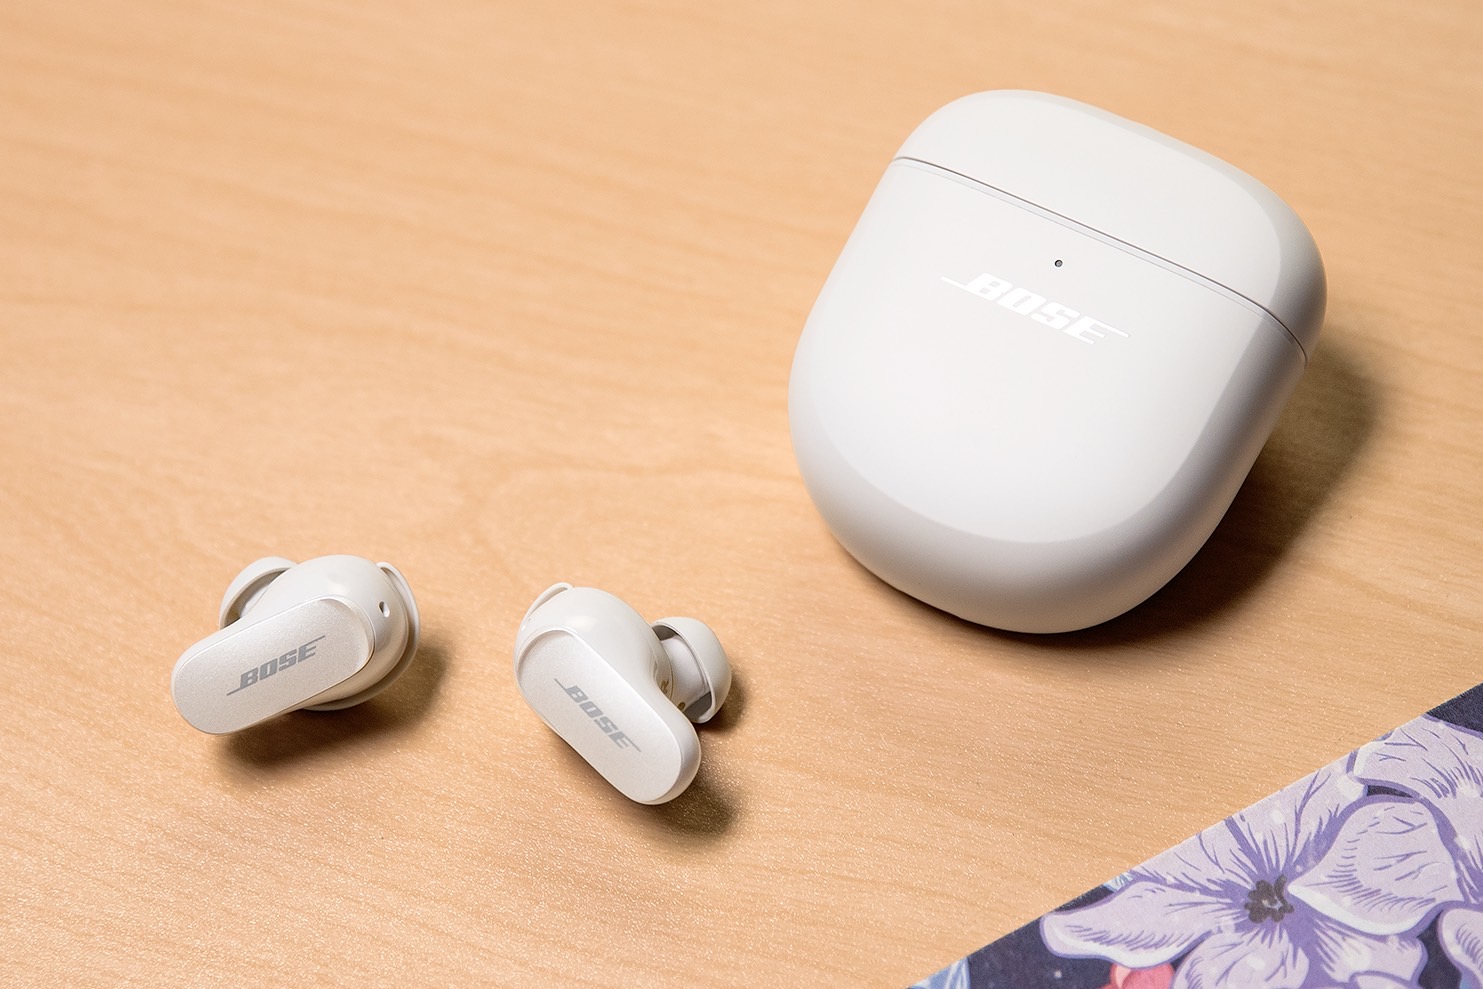 Bose shrinks the size and weight of its noise-canceling earbuds